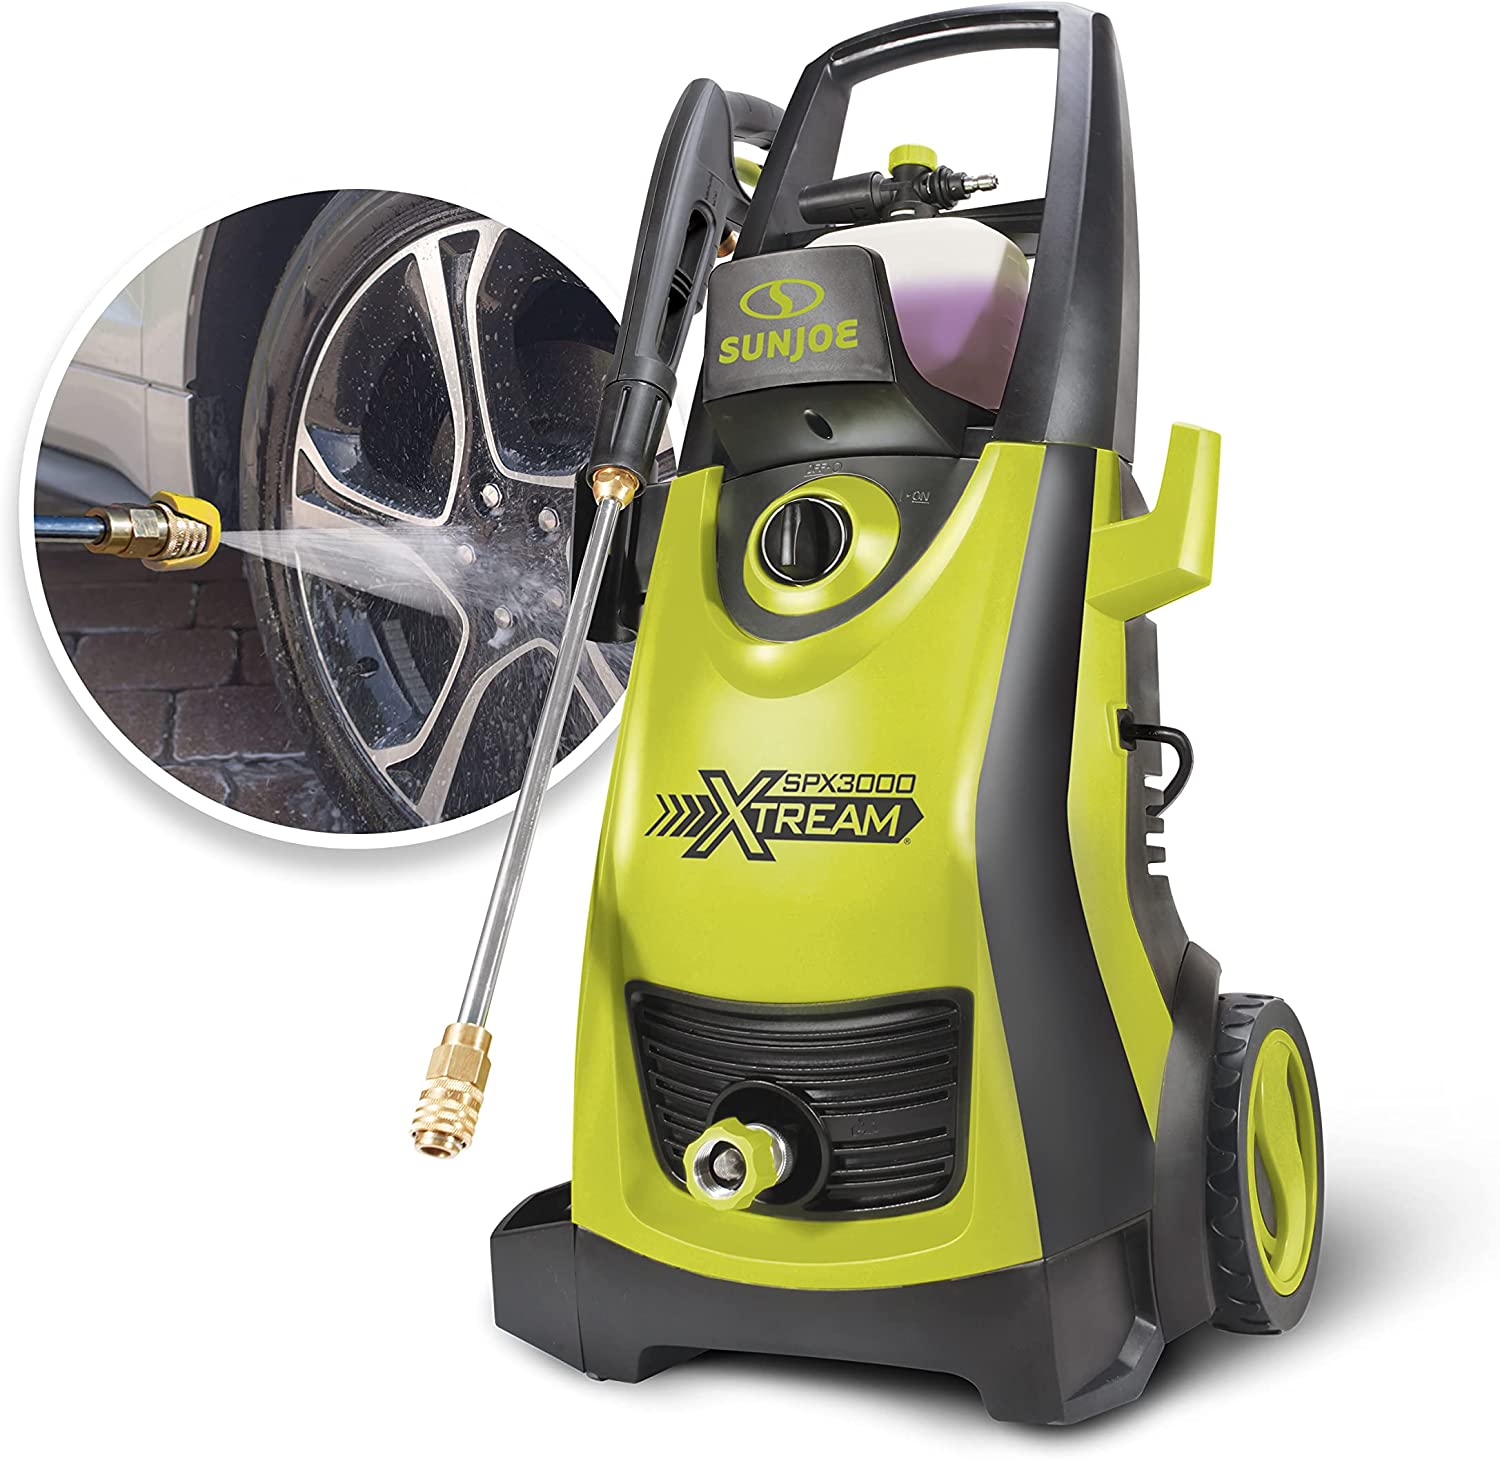 SPX 3000-XT1 | 2200 PSI | 13 Amp | Pressure Washer - Open Box or Remanufactured + Free Shipping $99.97